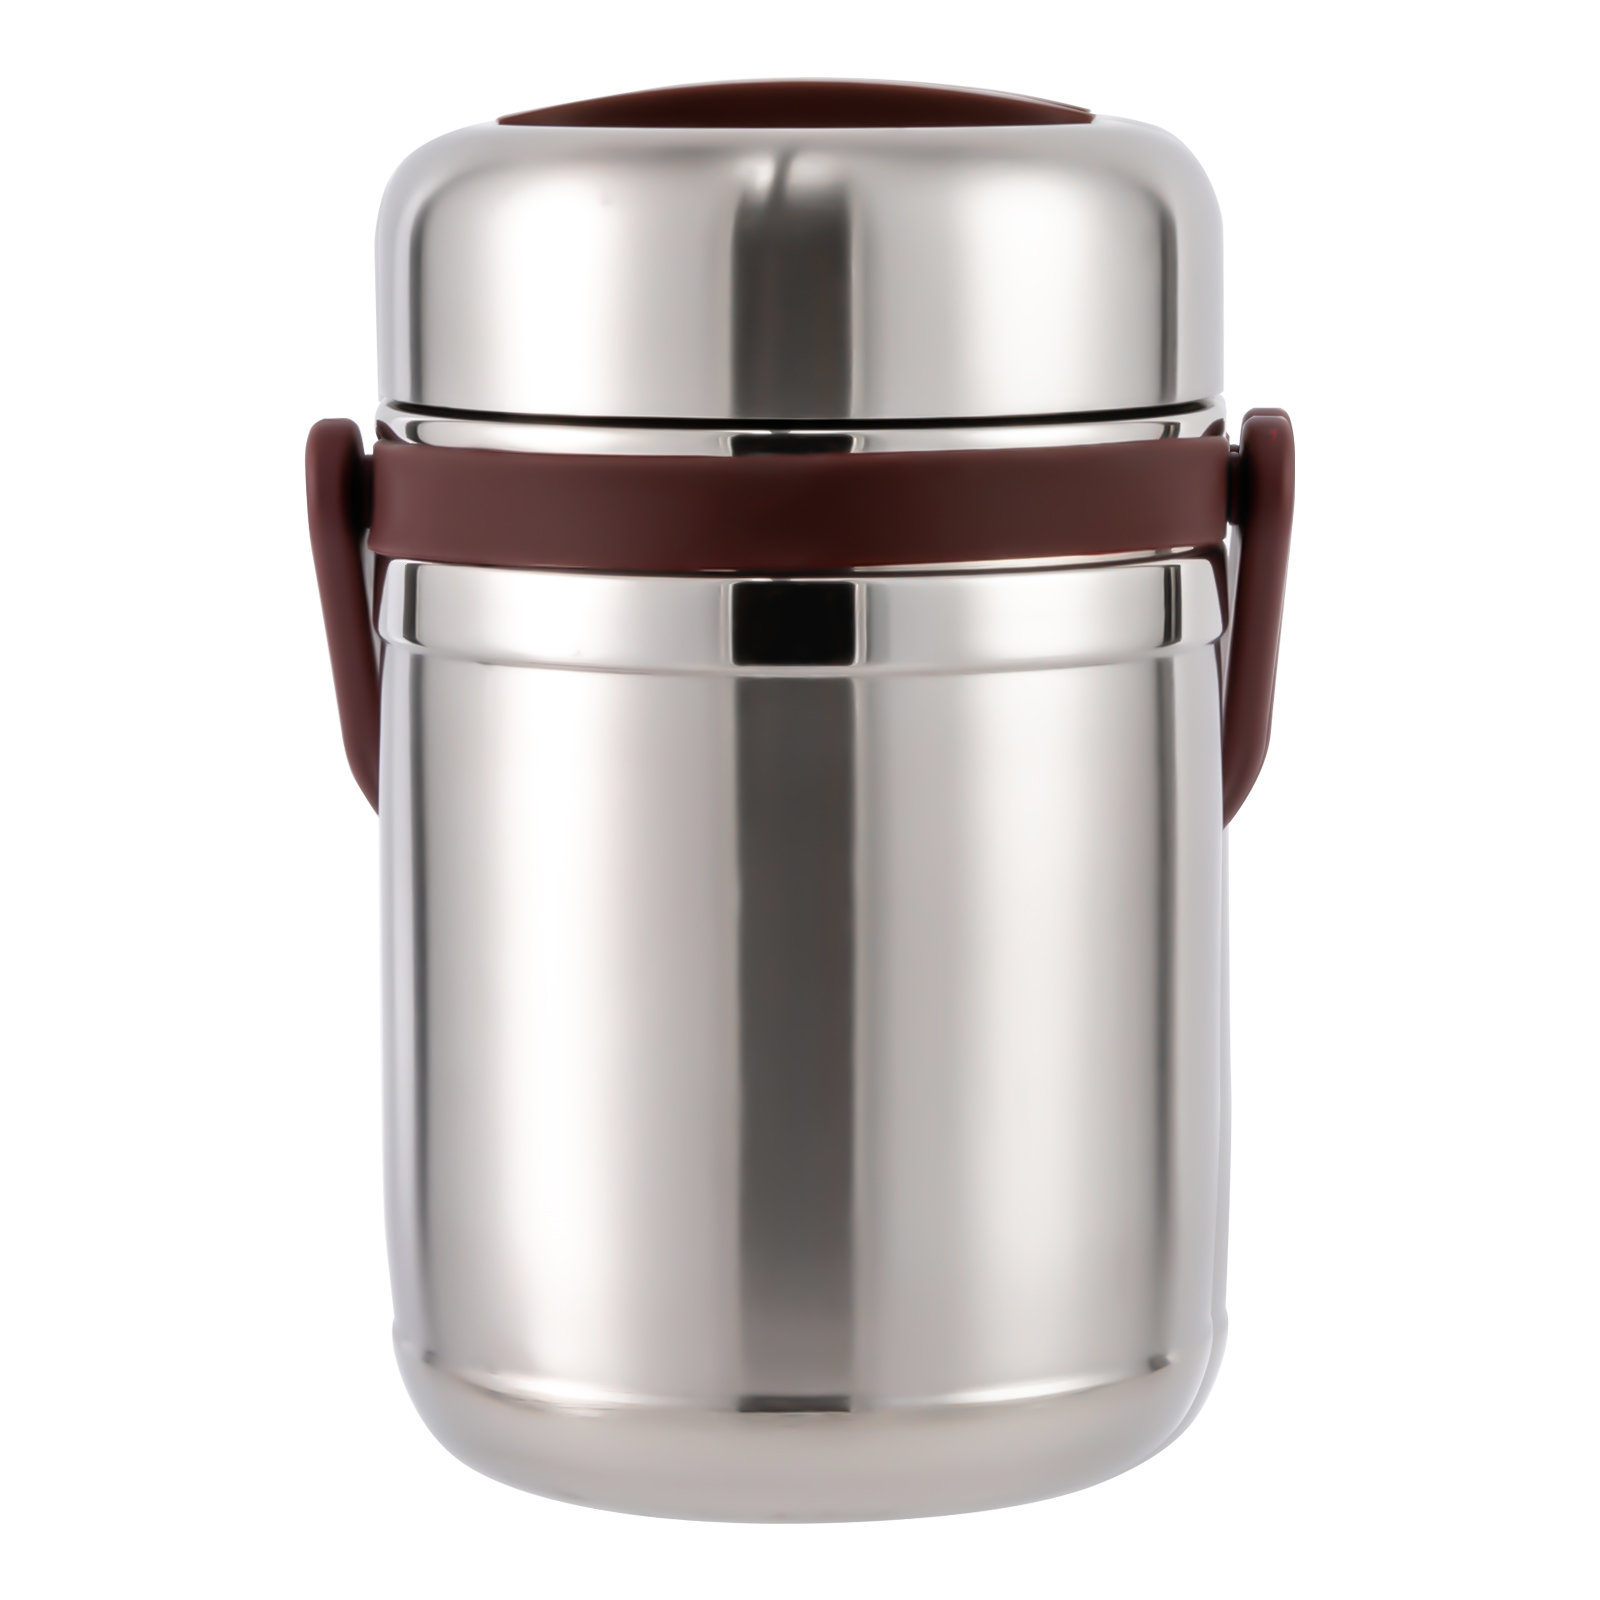 Thermos Vacuum Insulated Stainless Steel Food Jar w/Microwavable Container, 12 oz, Silver